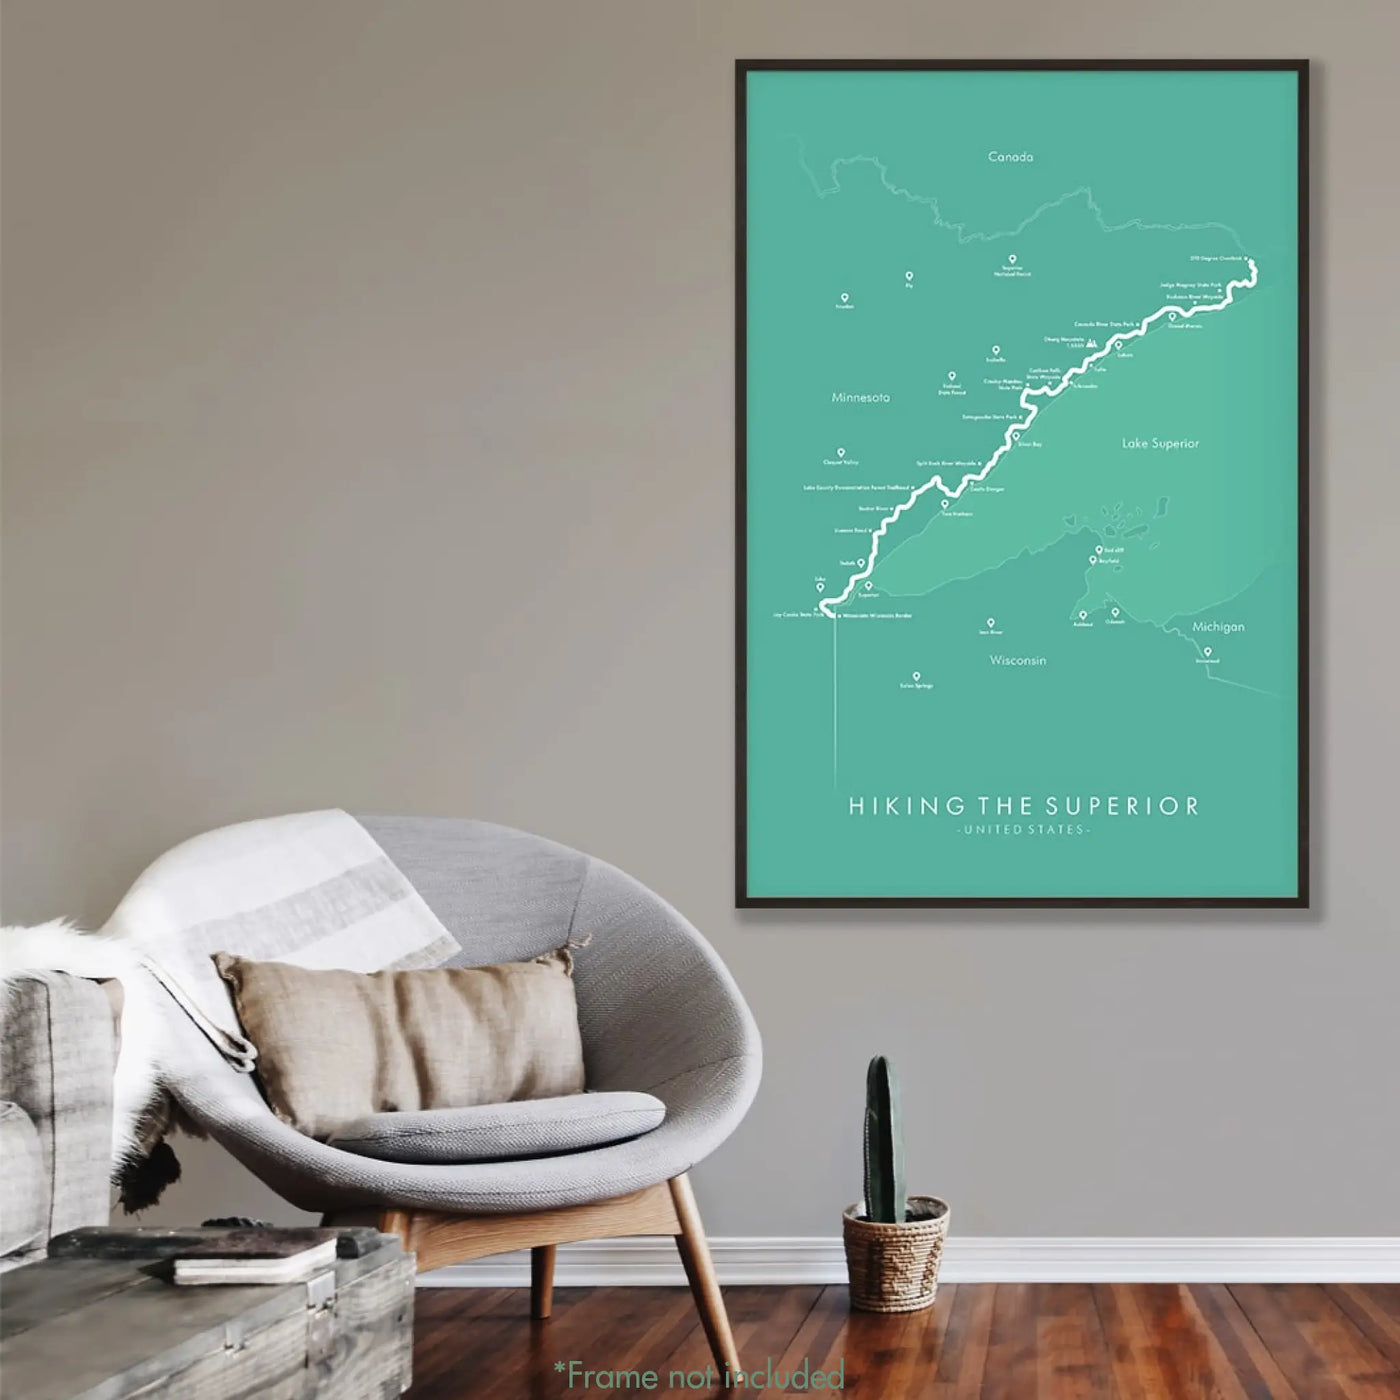 Trail Poster of Superior Hiking Trail - Teal Mockup